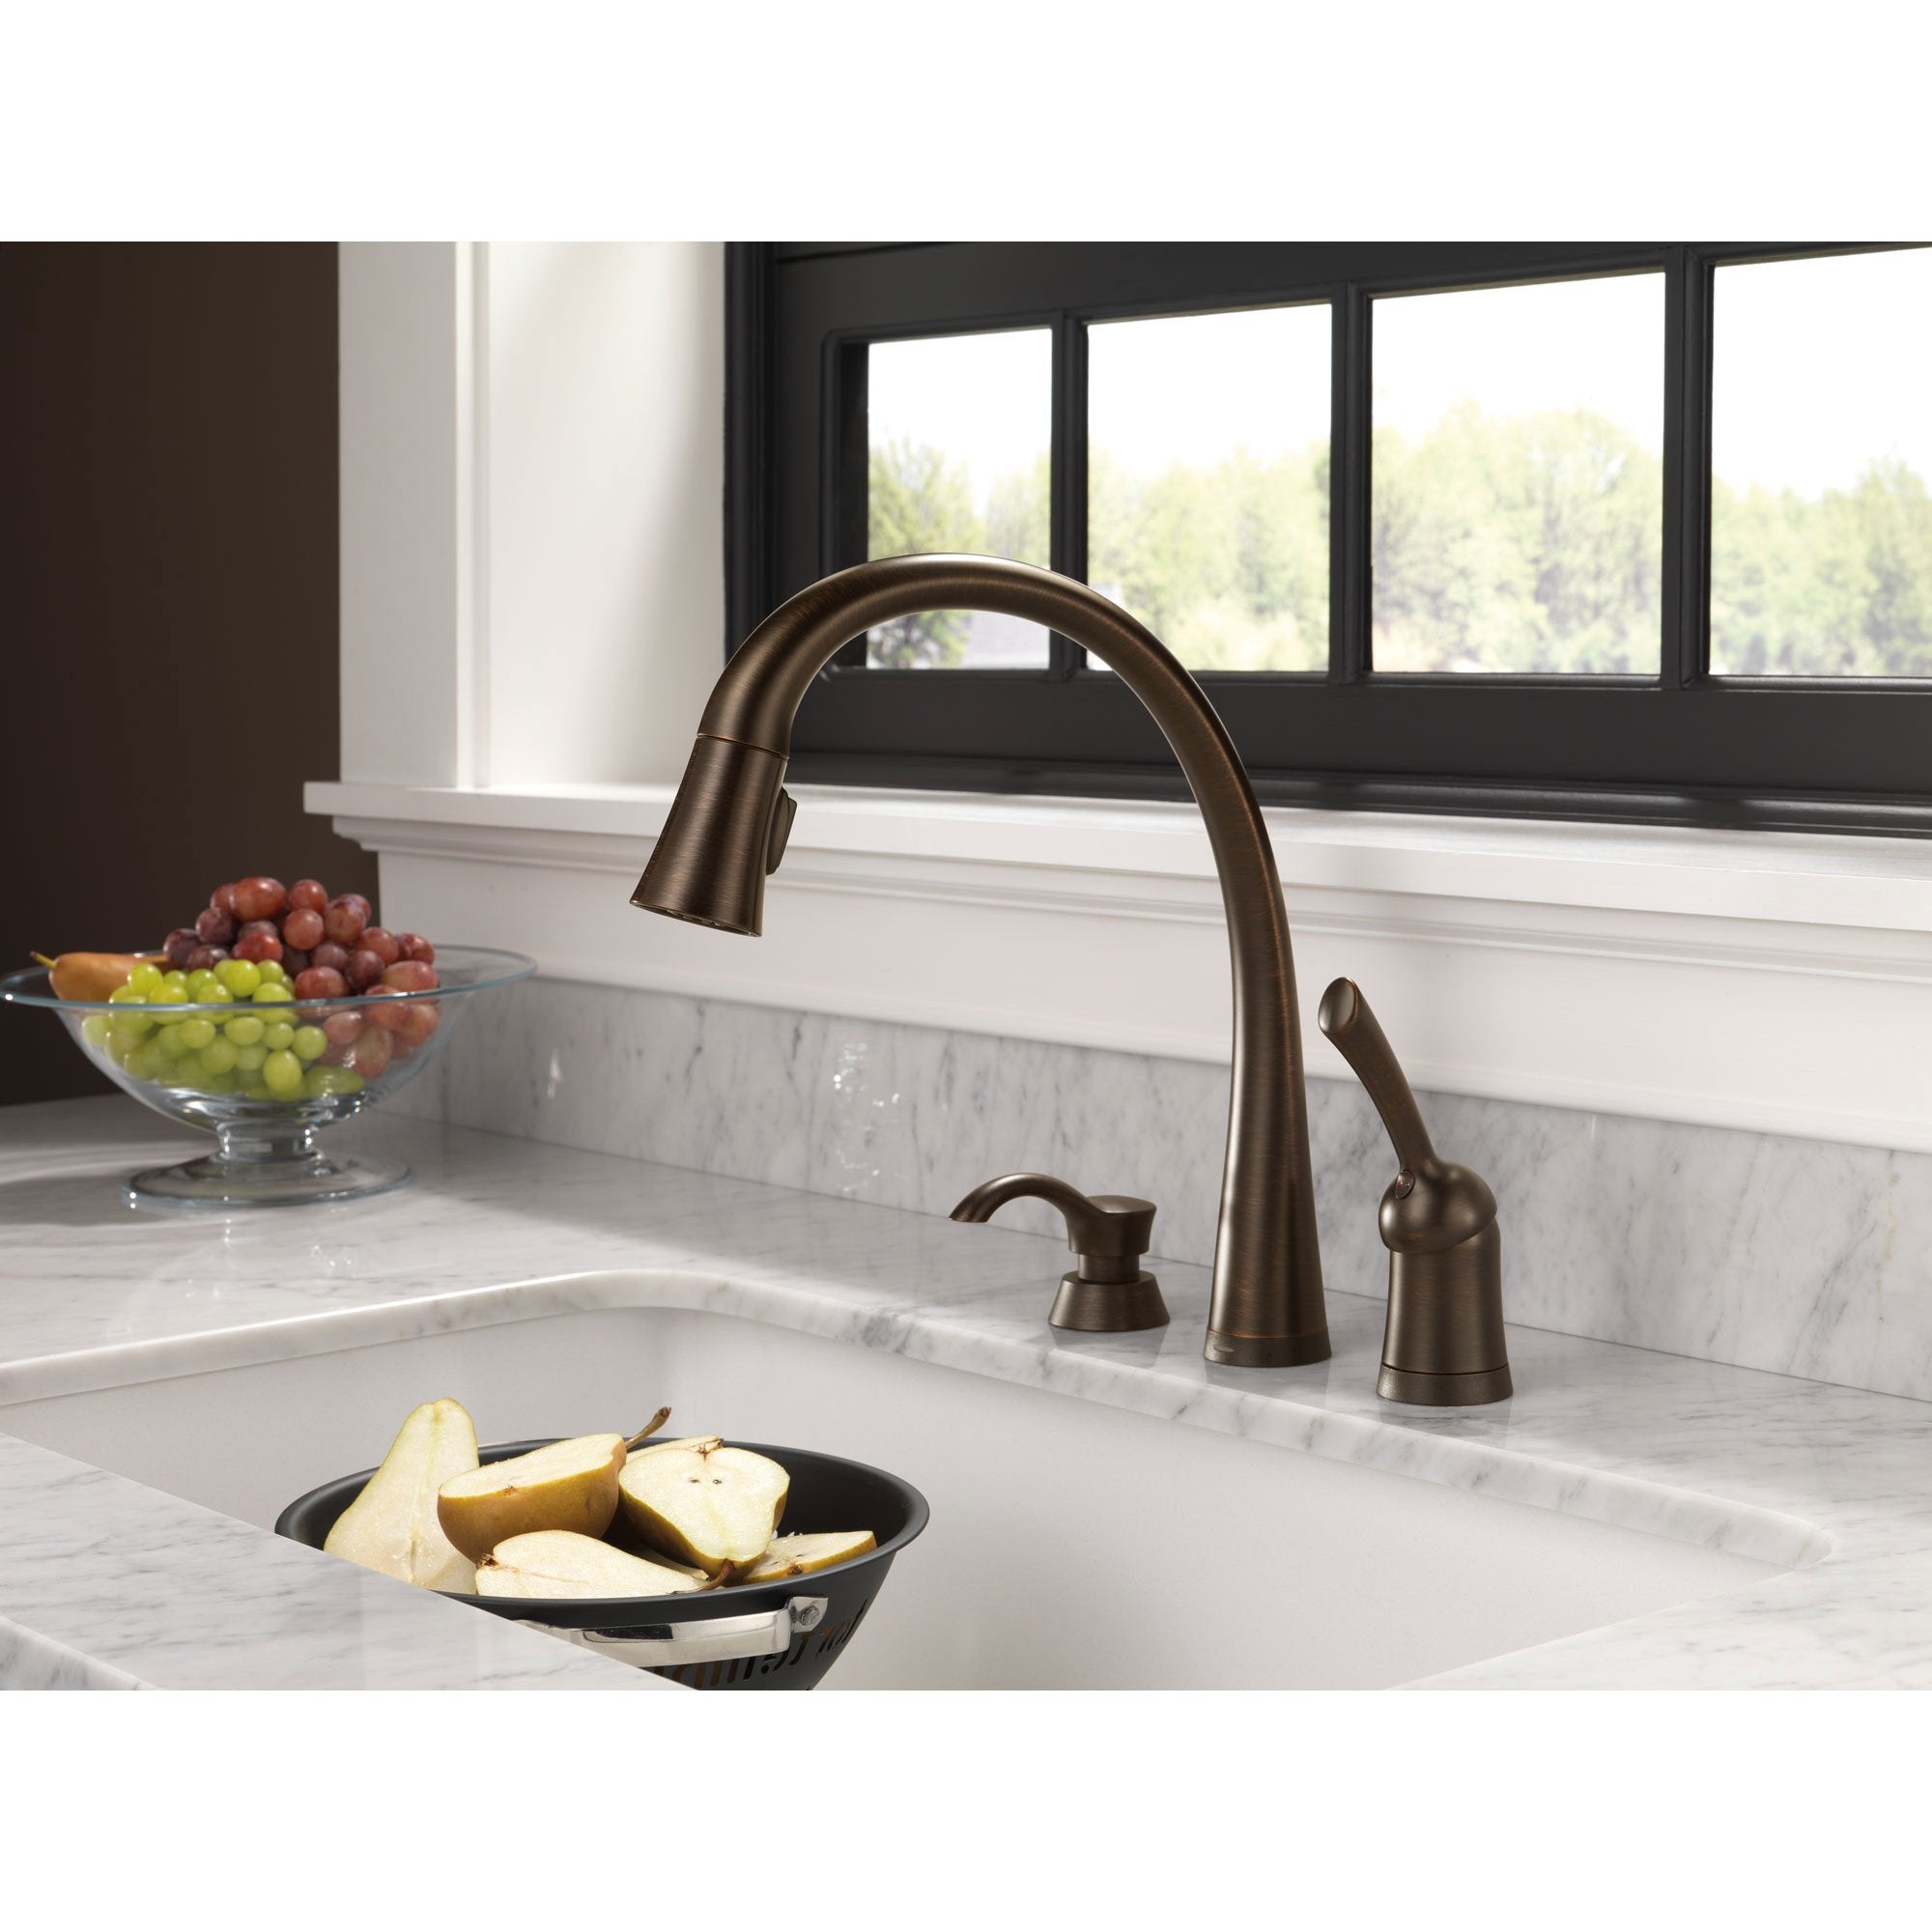 Delta Venetian Bronze Finish Pilar Collection Single Handle Pull Down Kitchen Faucet with Touch2O Technology and Soap Dispenser Package D032CR